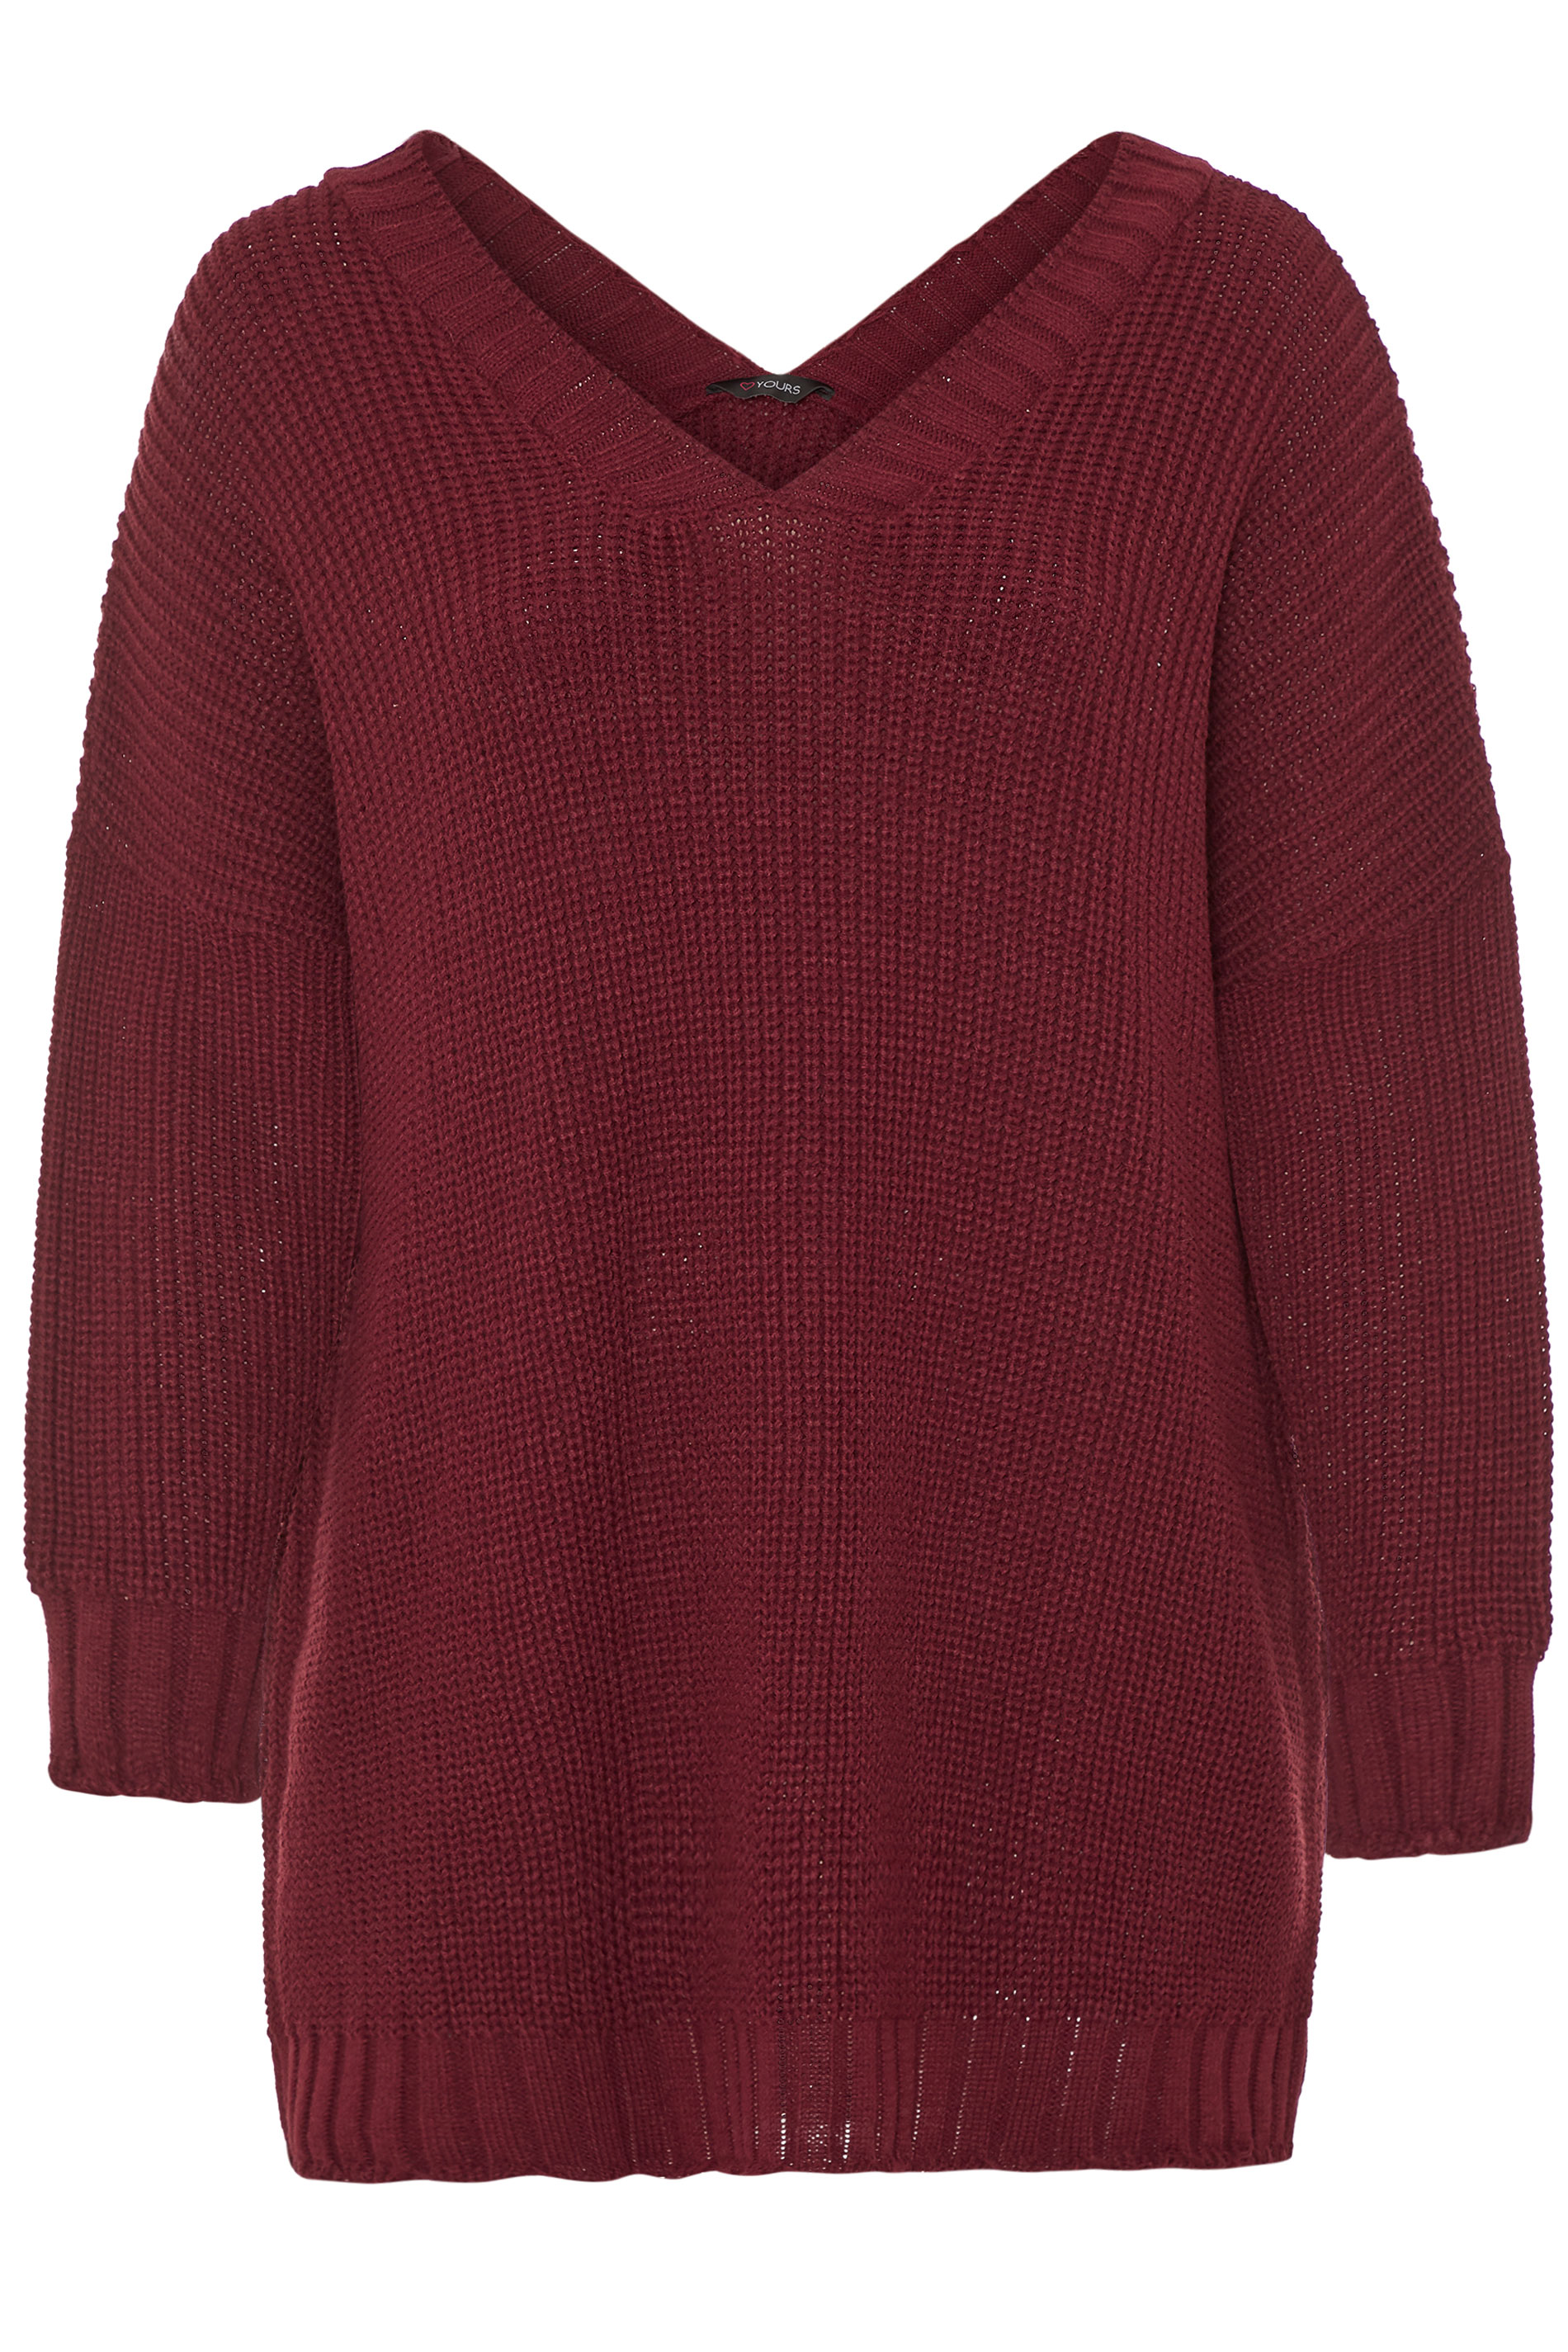 Burgundy Distressed Oversized Knitted Jumper | Yours Clothing